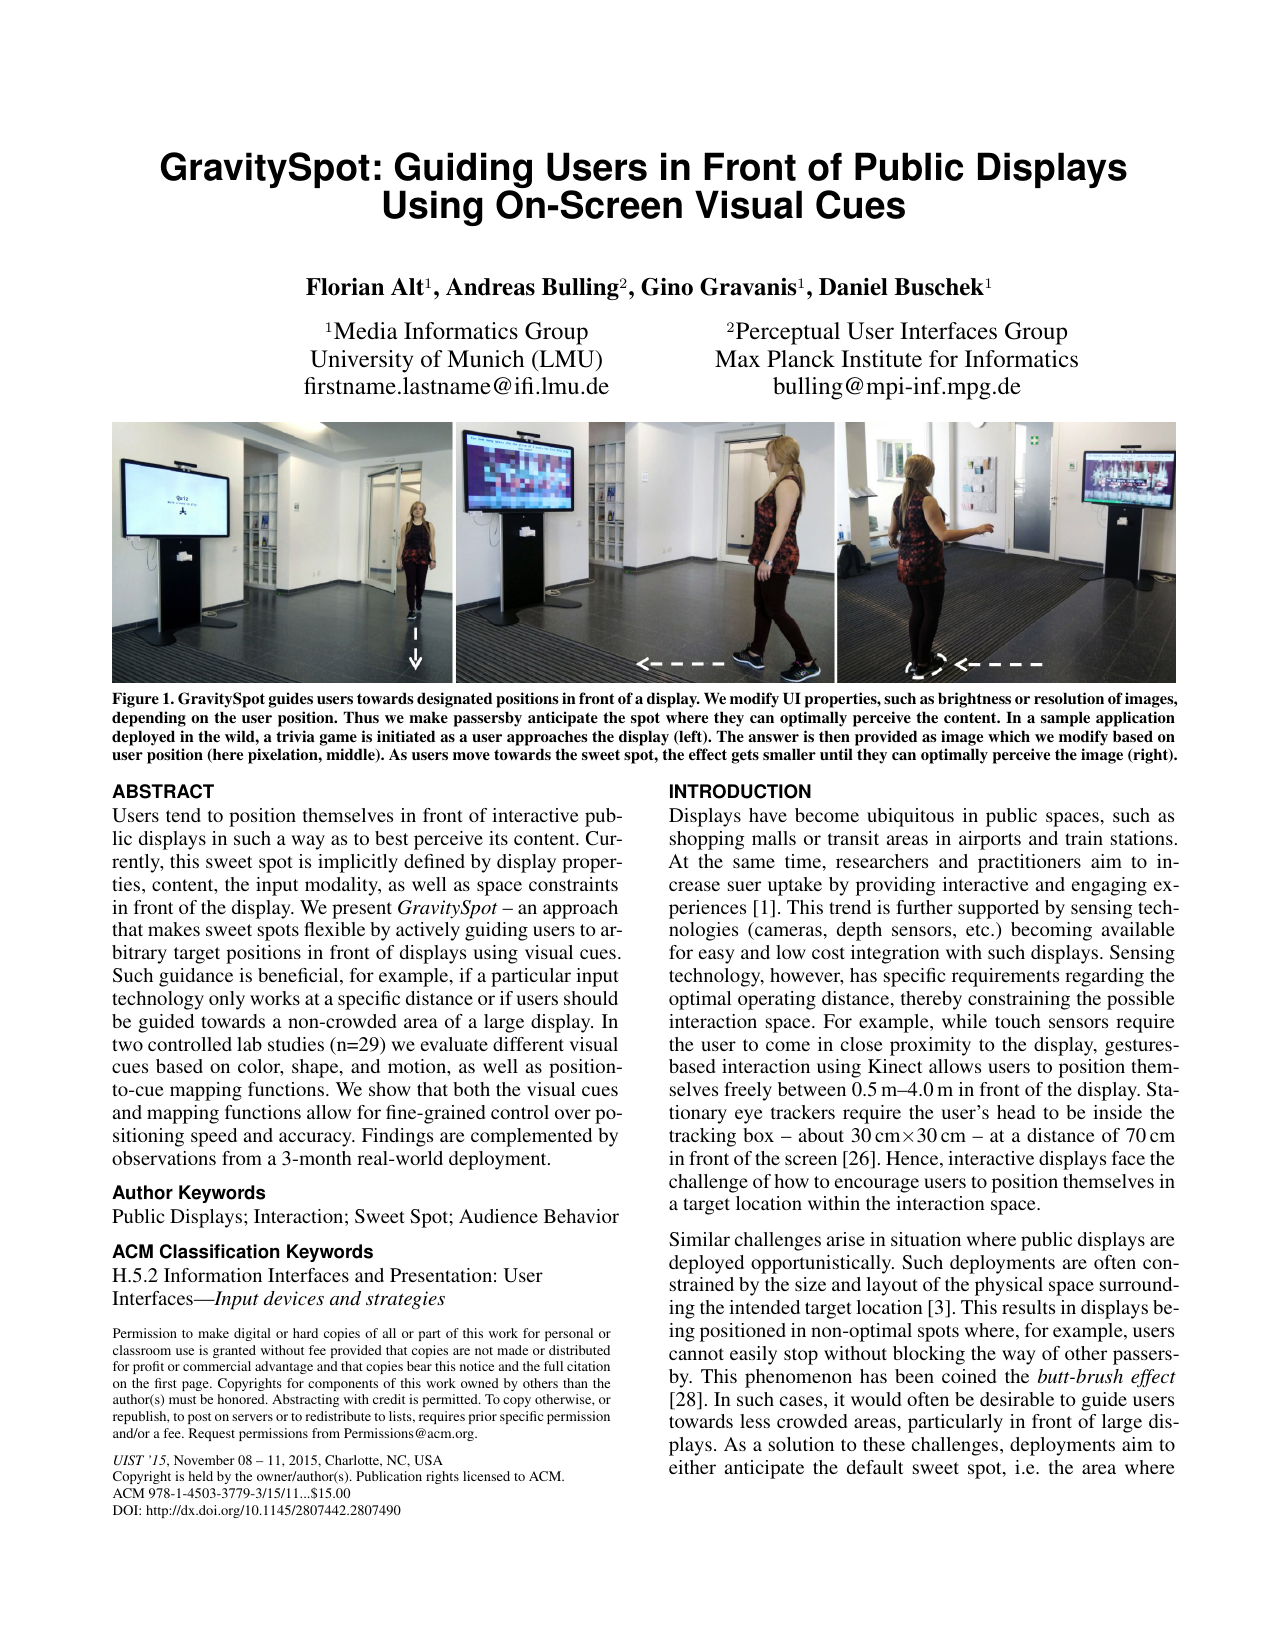 GravitySpot: Guiding Users in Front of Public Displays Using On-Screen Visual Cues